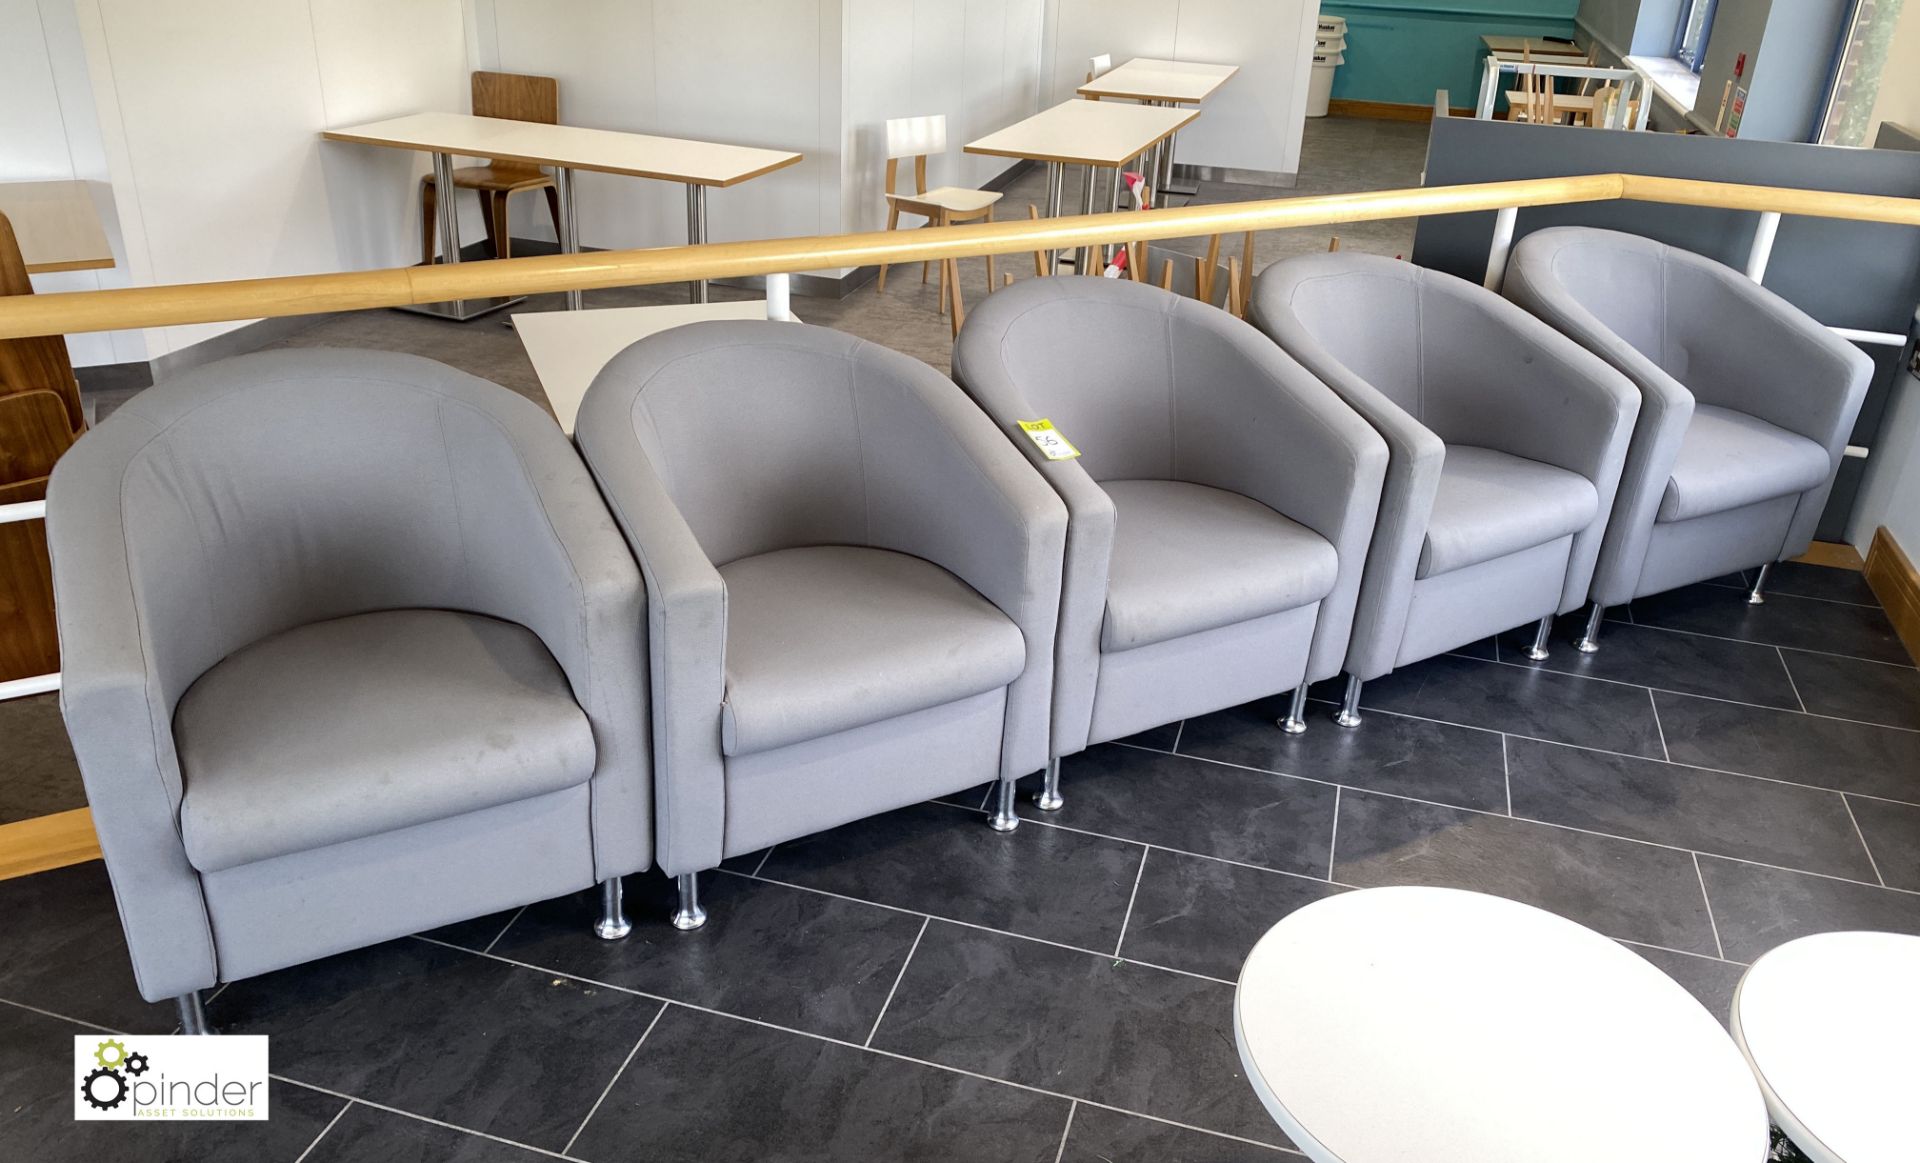 5 upholstered Tub Chairs, grey (located in Restaurant)